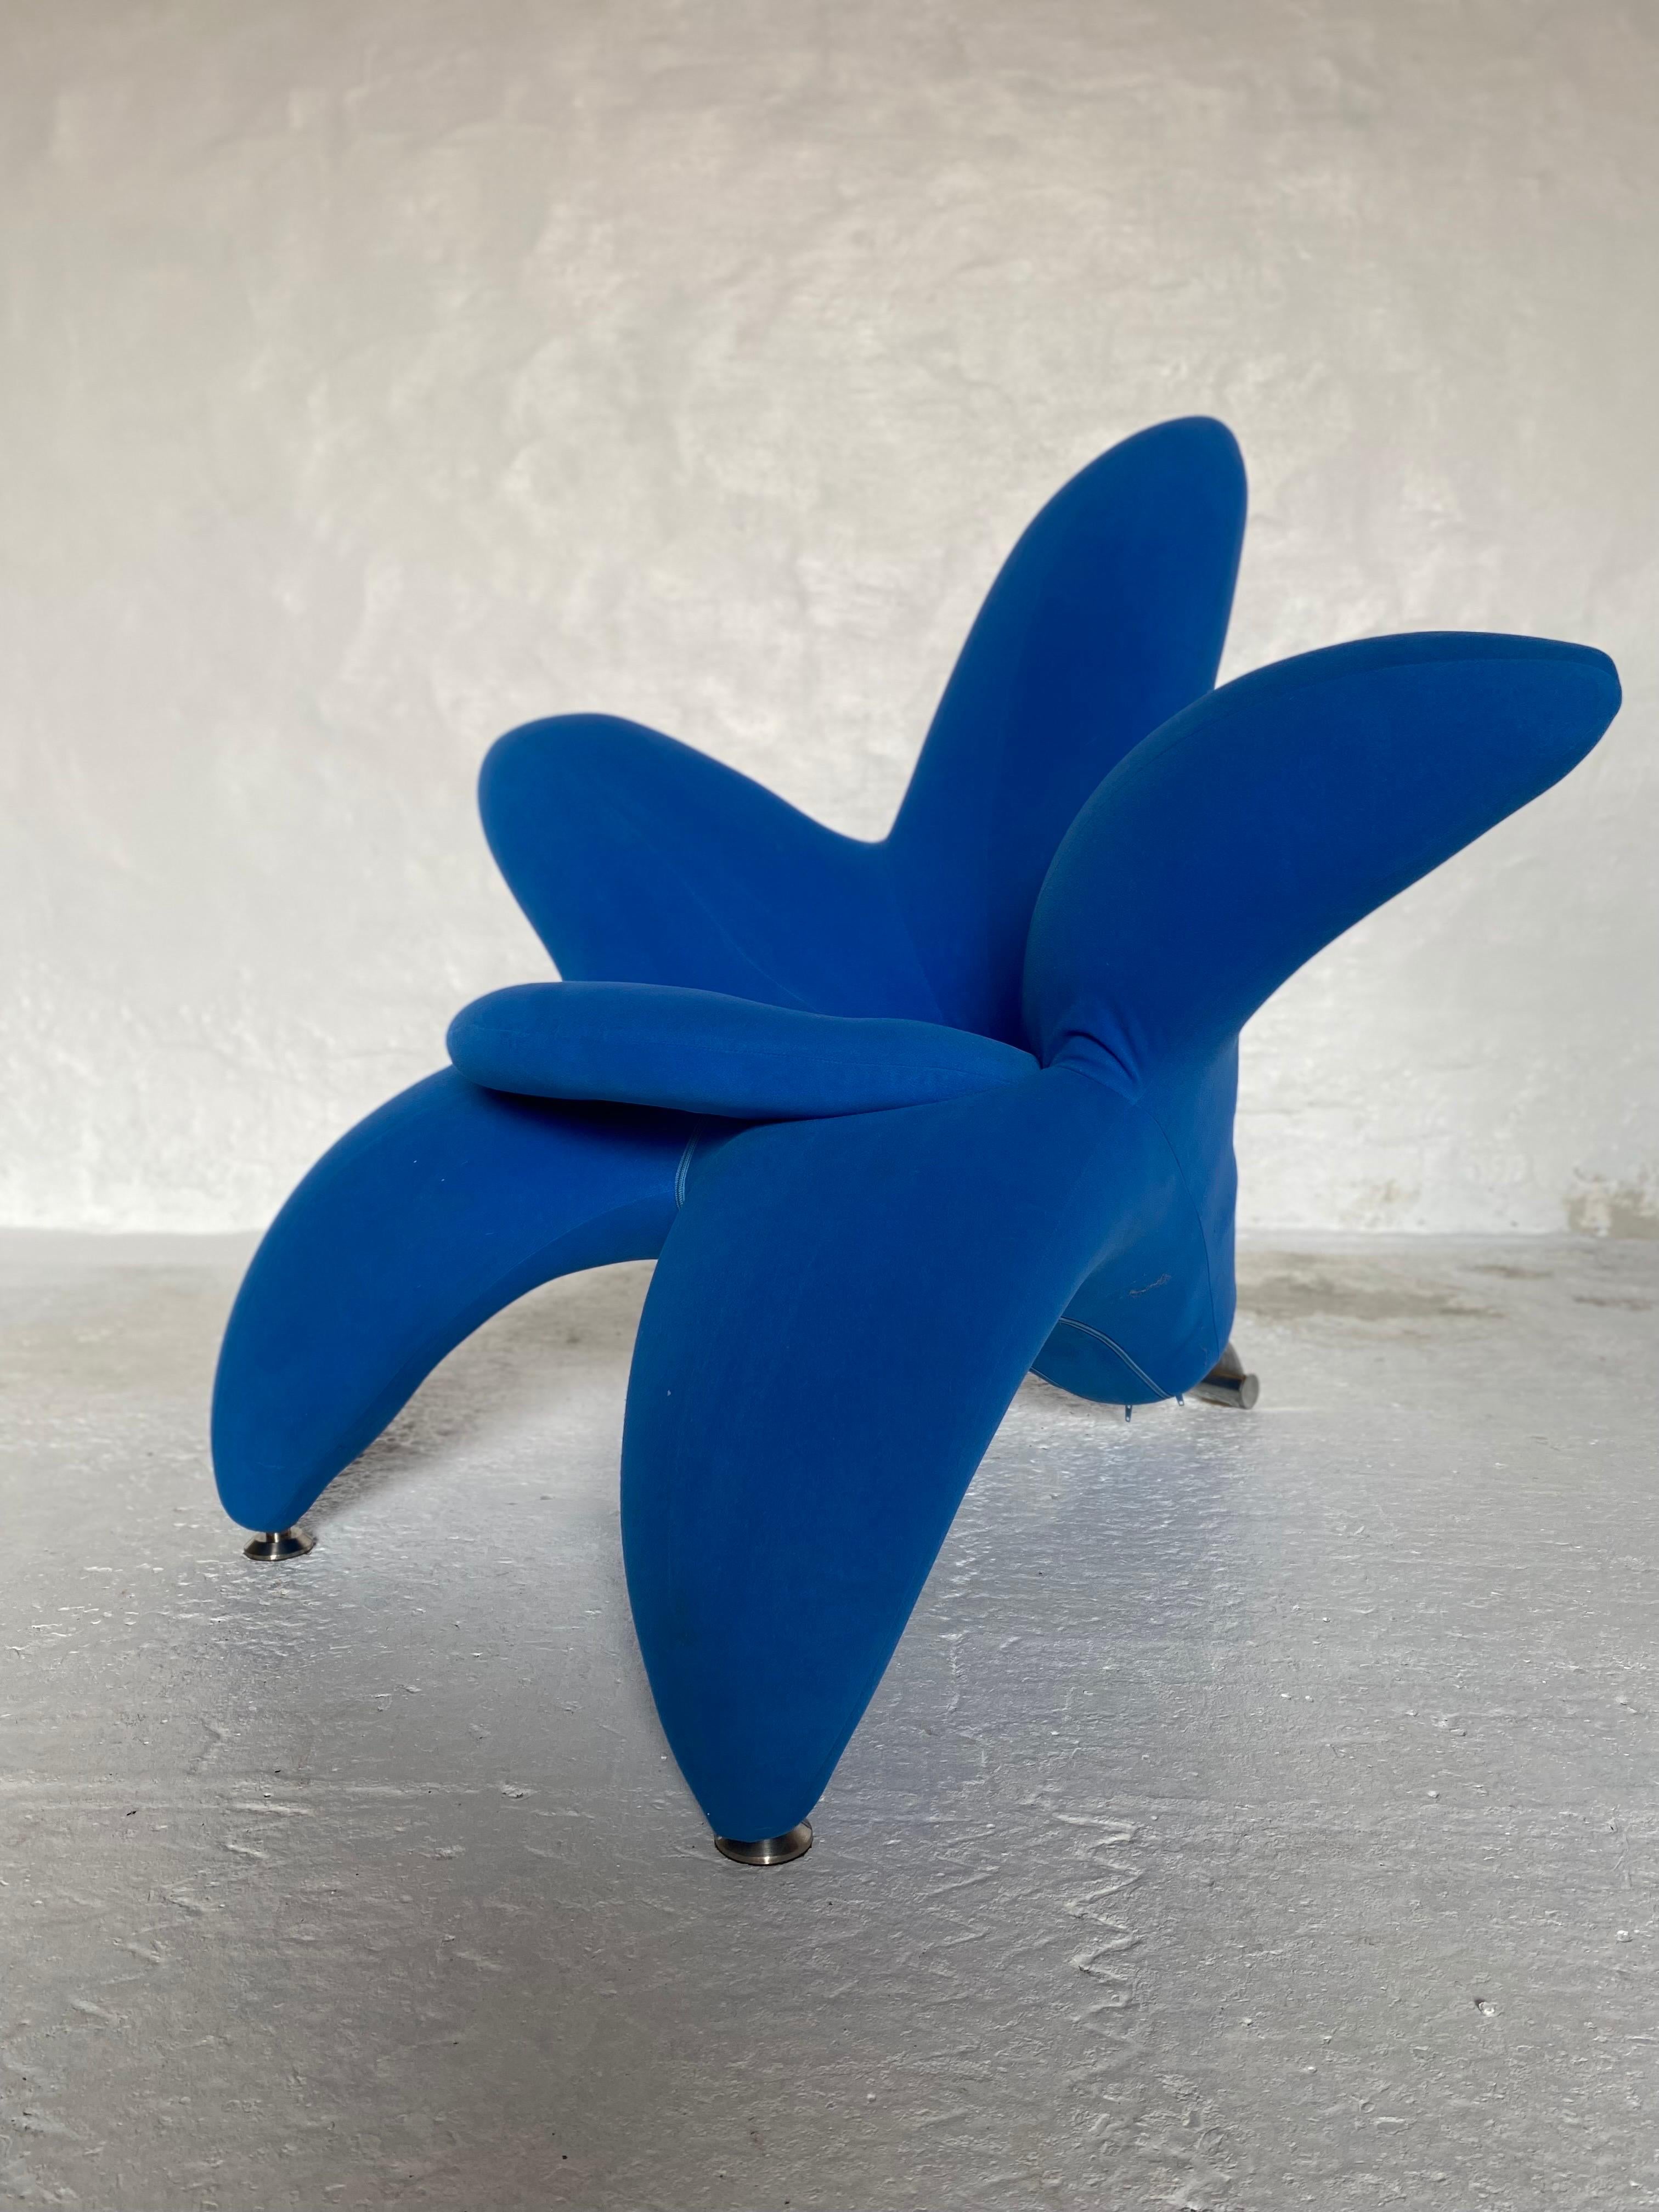 Getsuen Iconic armchair by Masonari Umeda, a Japanese designer who had worked in Italy in collaboration with the company Edra specializing in the design of new inventive fabrics and sculptural forms in chairs. The flower shape and the use of